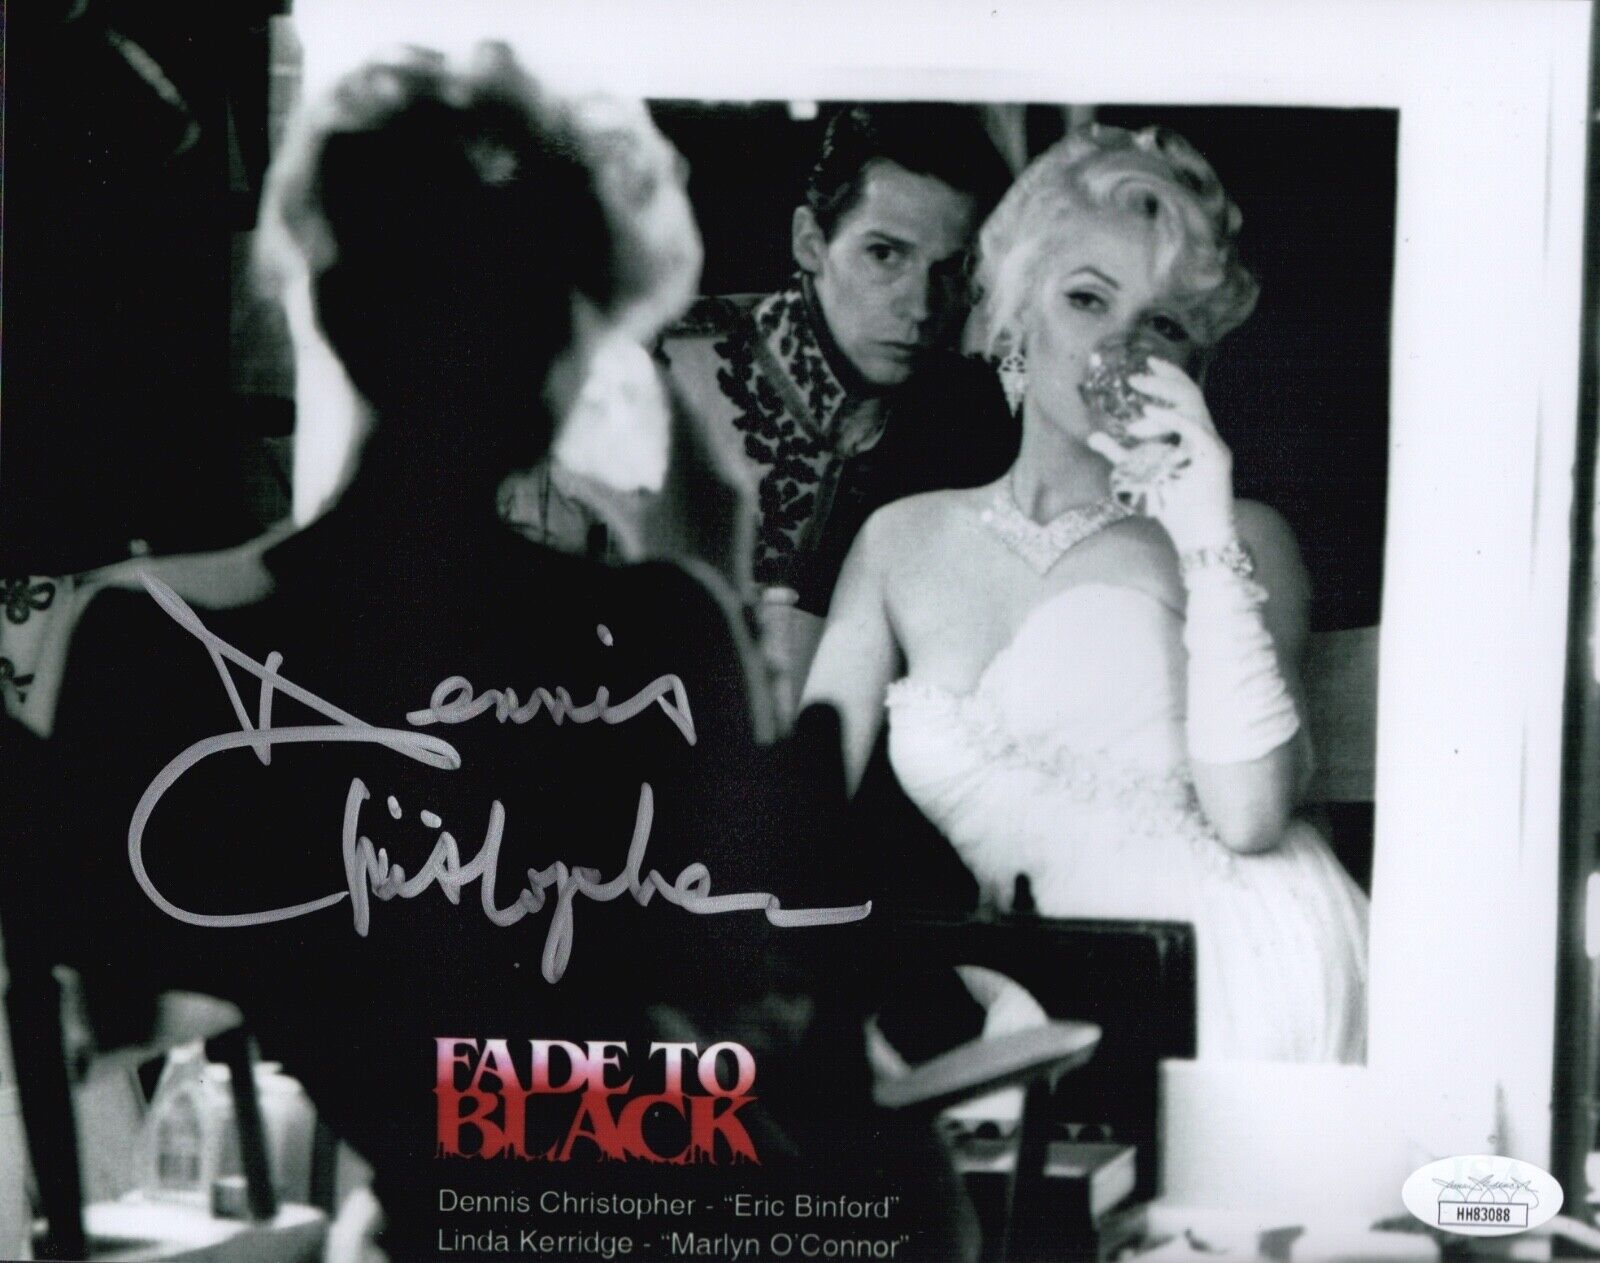 DENNIS CHRISTOPHER Signed FADE TO BLACK 8x10 Photo Poster painting Autograph JSA COA Cert